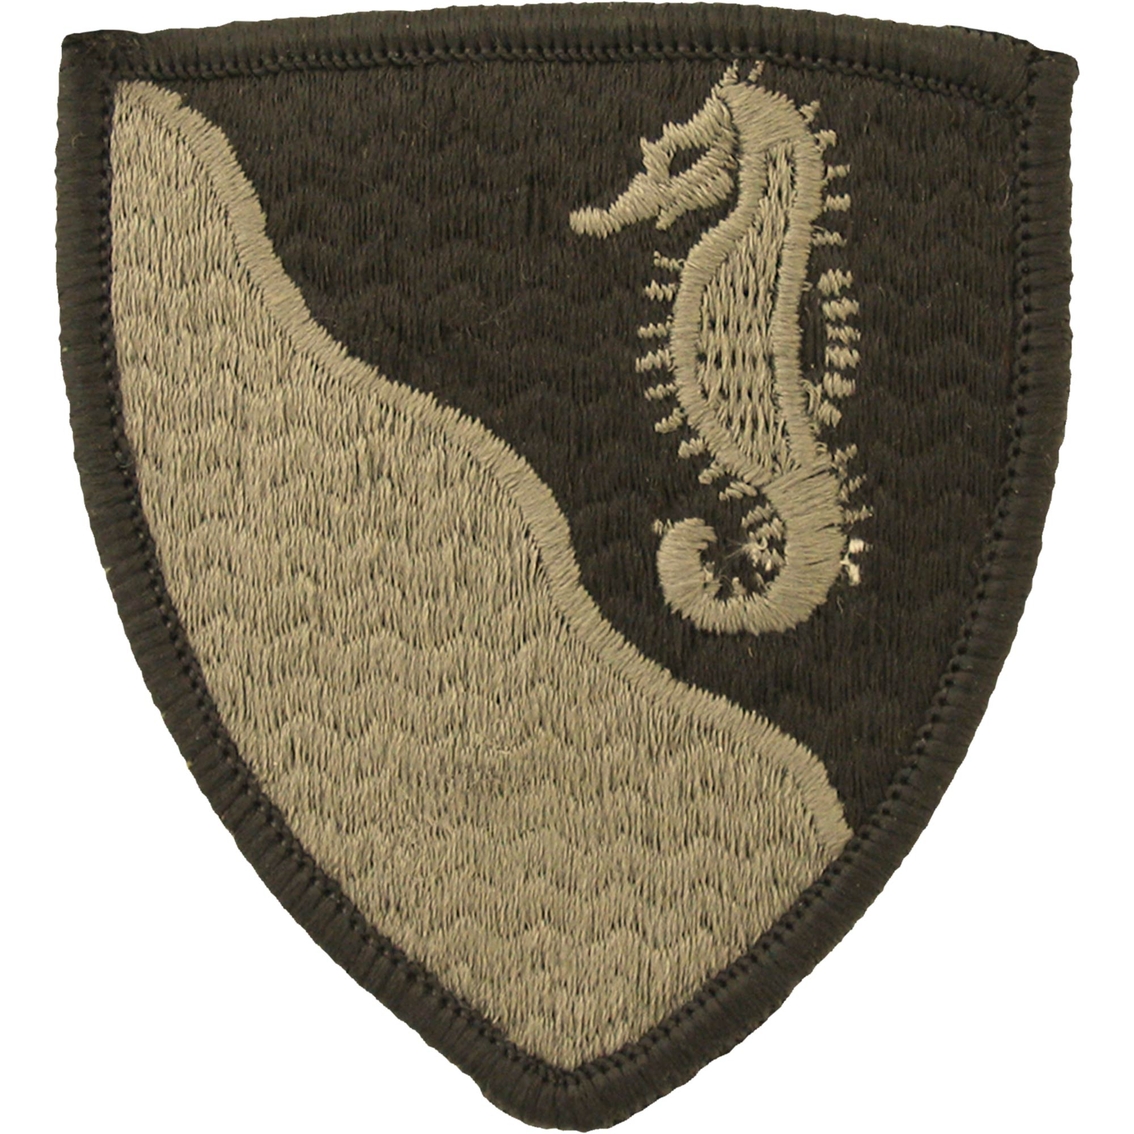 Army Engineer Unit Patches - Army Military